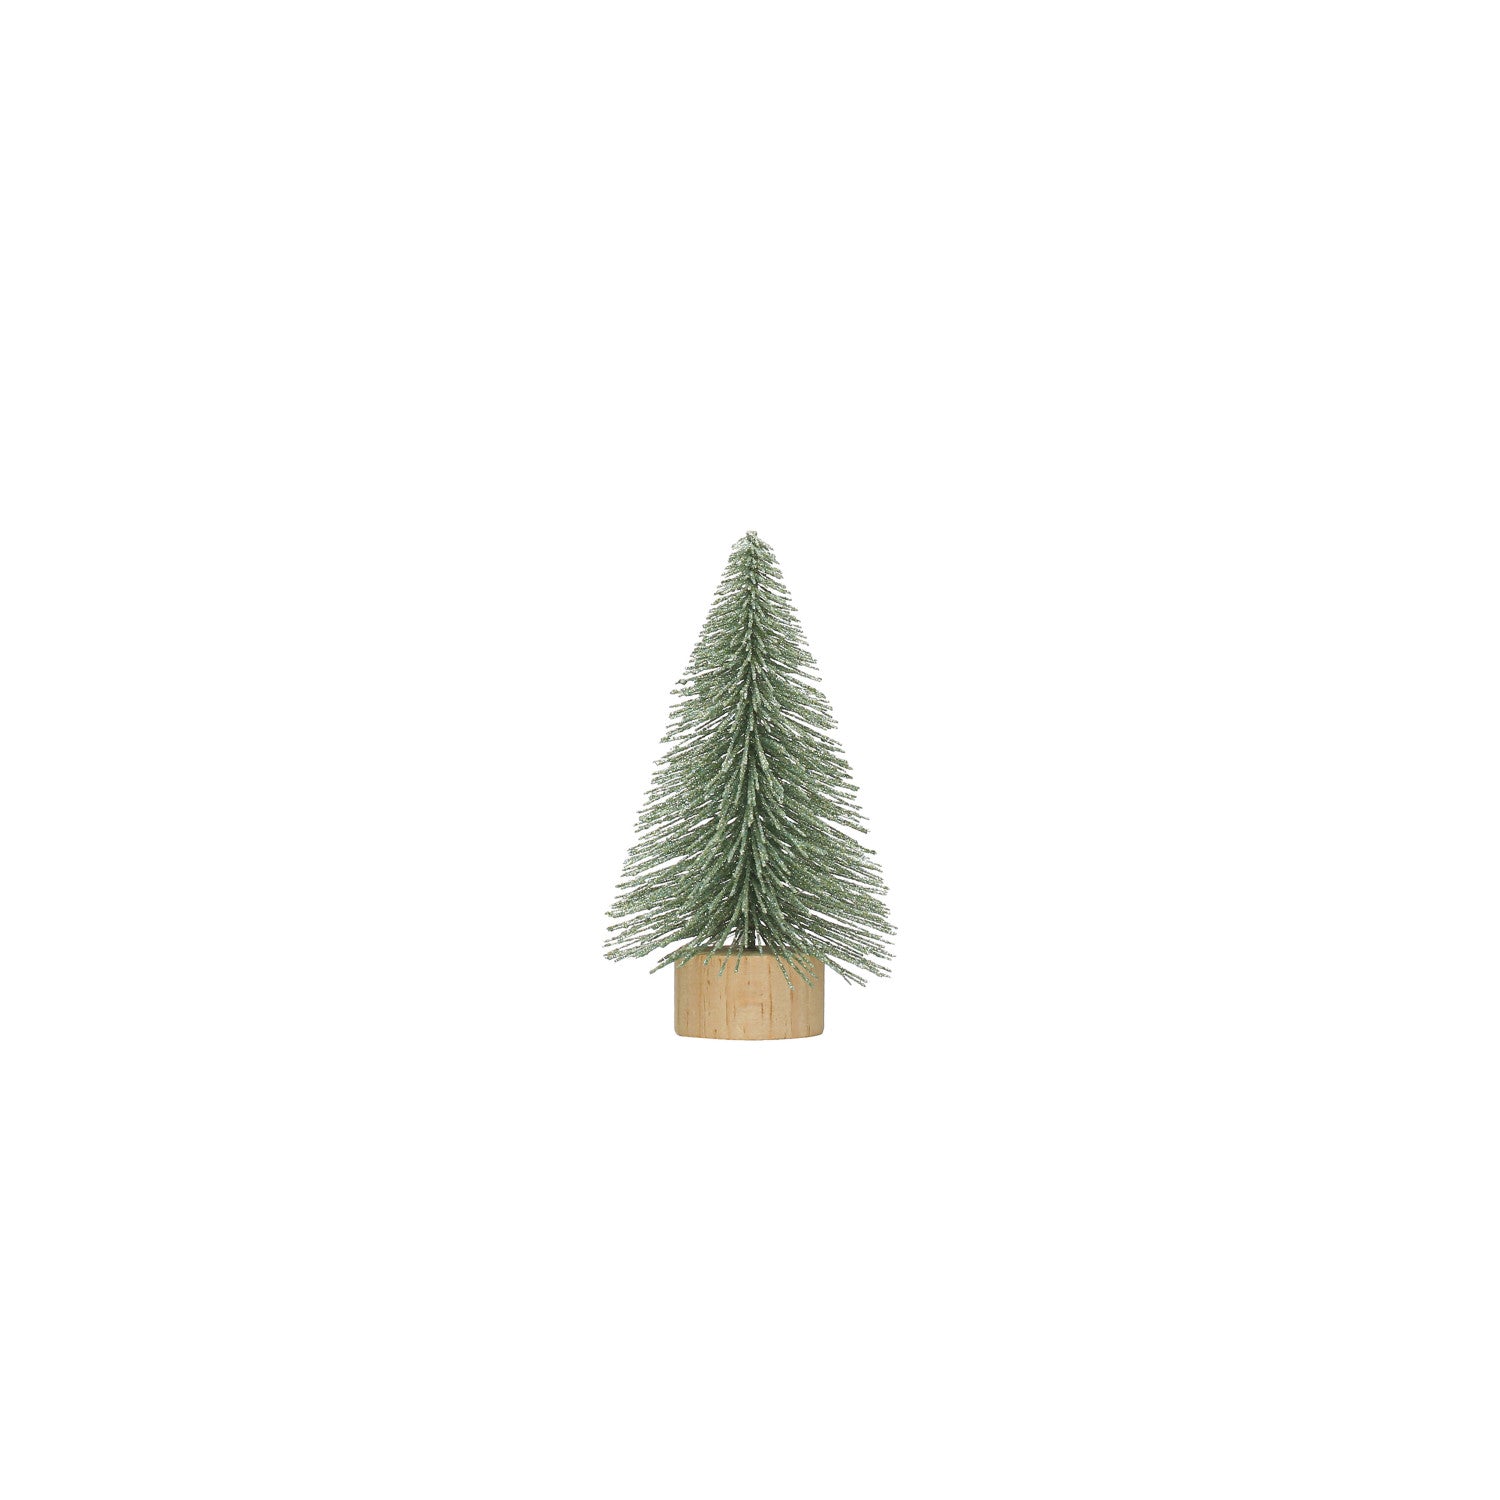 Small Glittered Mint Color Bottle Brush Tree with Wood Base,  6in.H